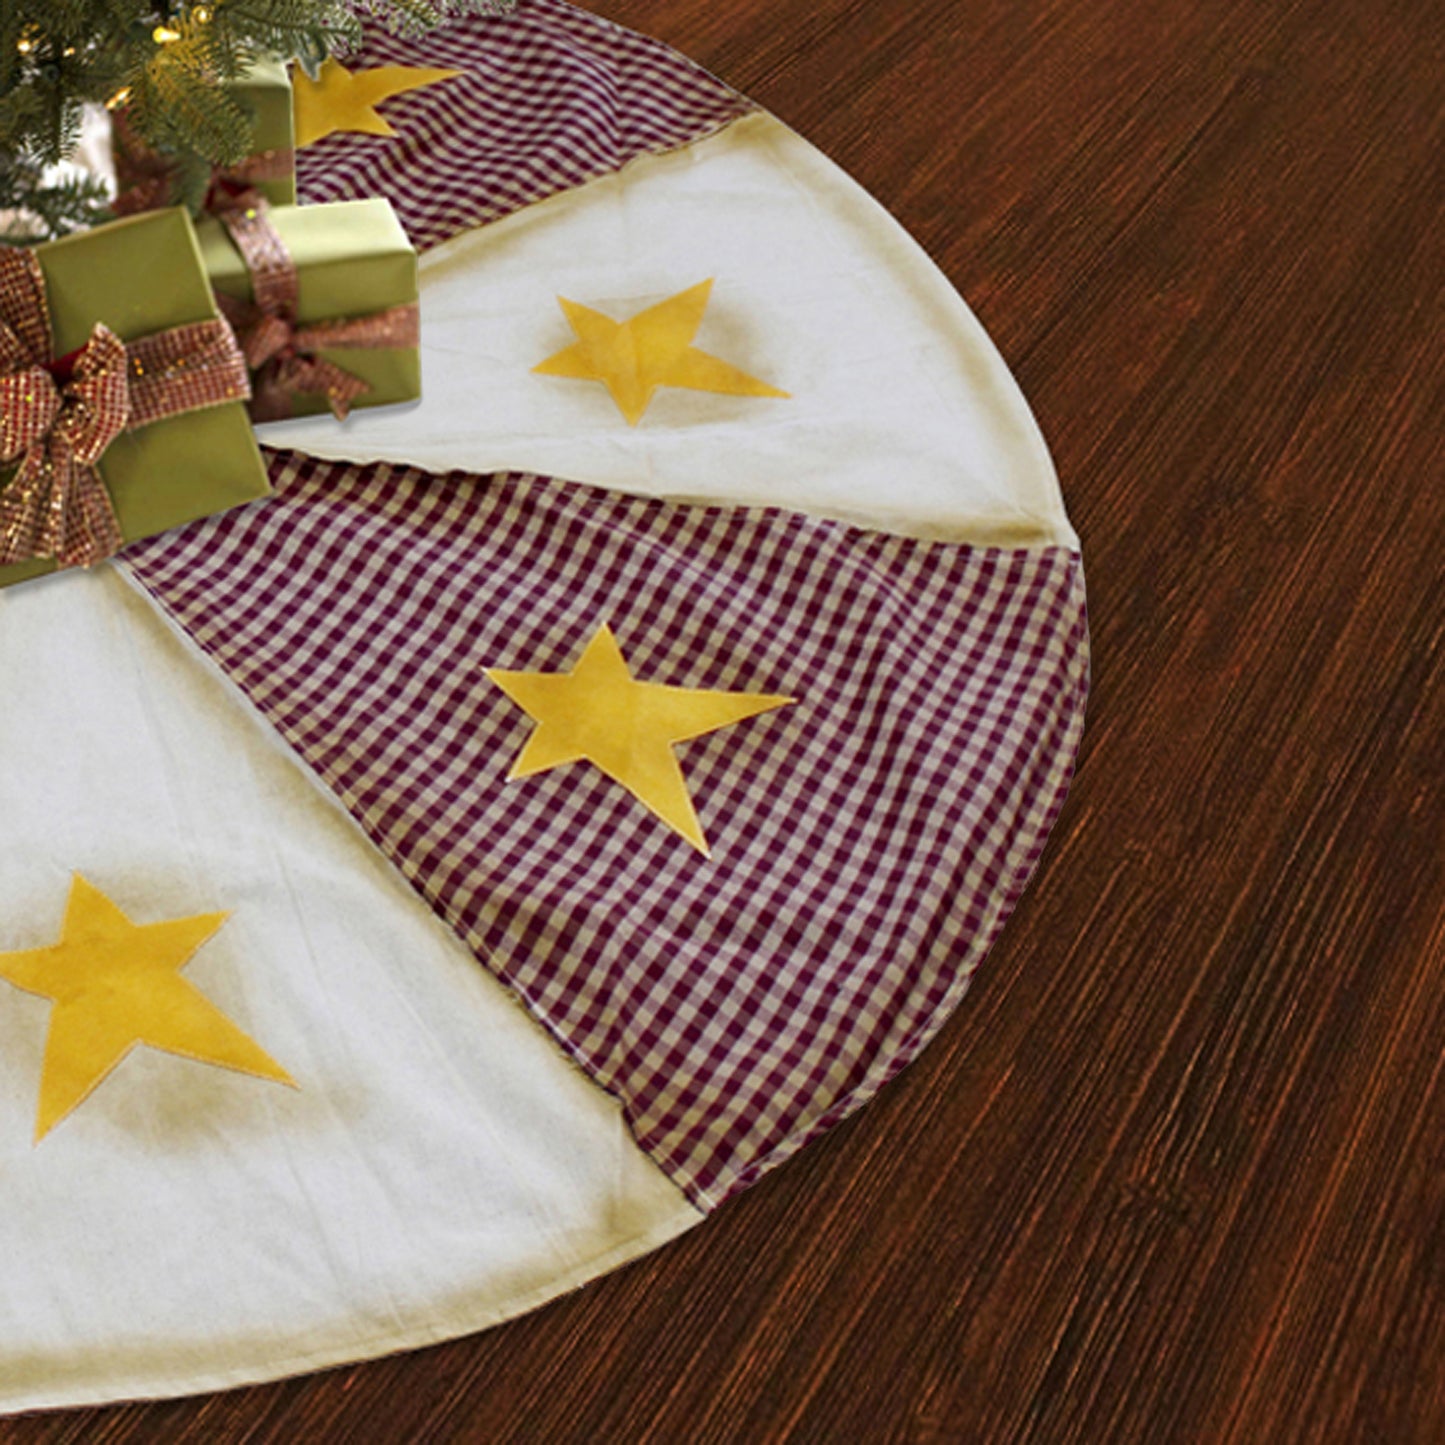 CVHOMEDECO. Primitives Rustic 50 Inch Patchwork Christmas Tree Skirt Double Layers Burgundy Plaid Burlap with Yellow Star Stitching for Christmas Holiday Party Décor.